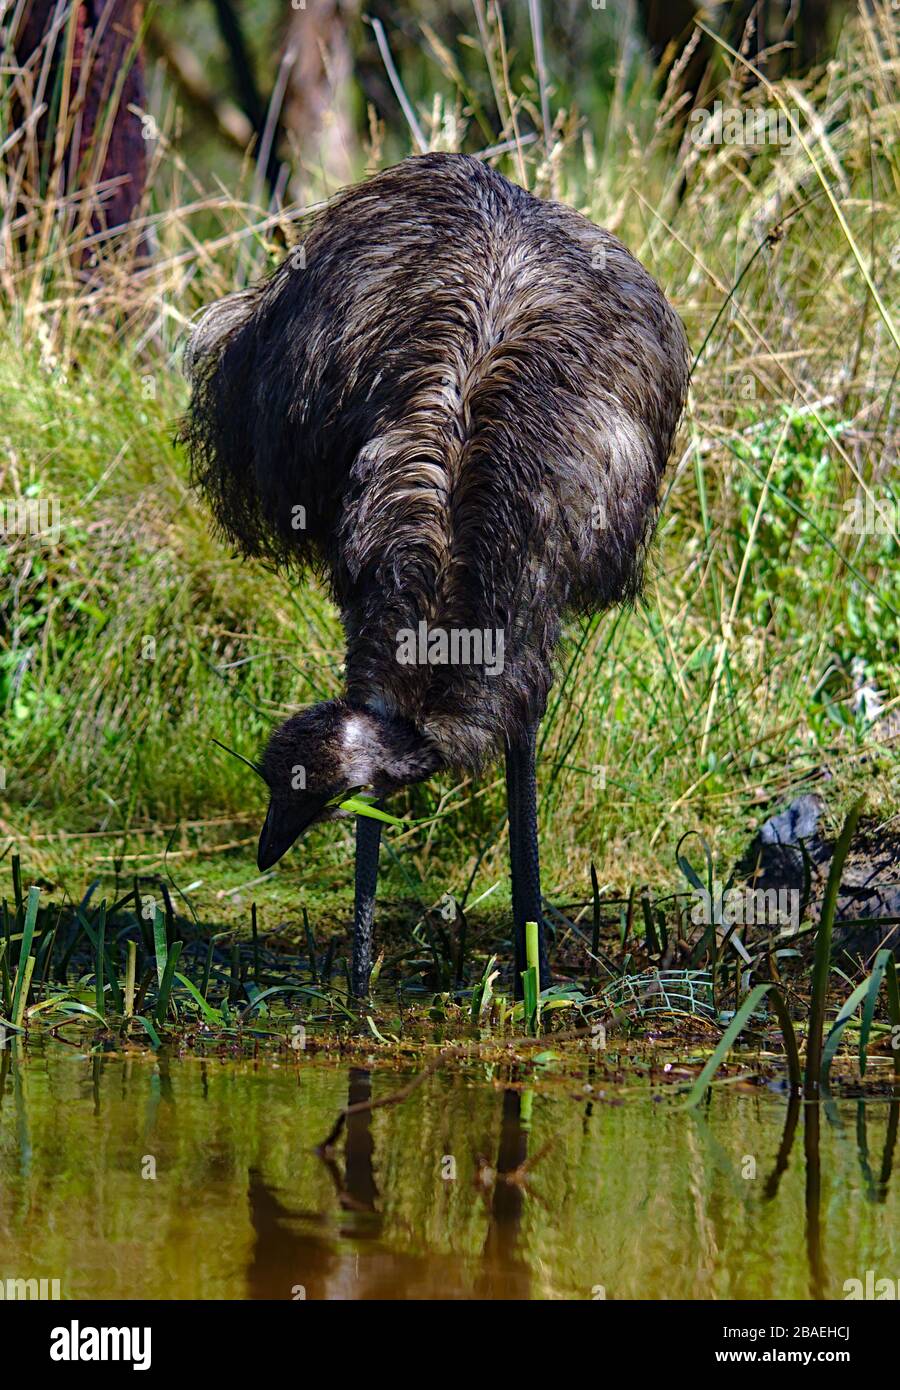 Emu with grass on mouth pecking near water Stock Photo